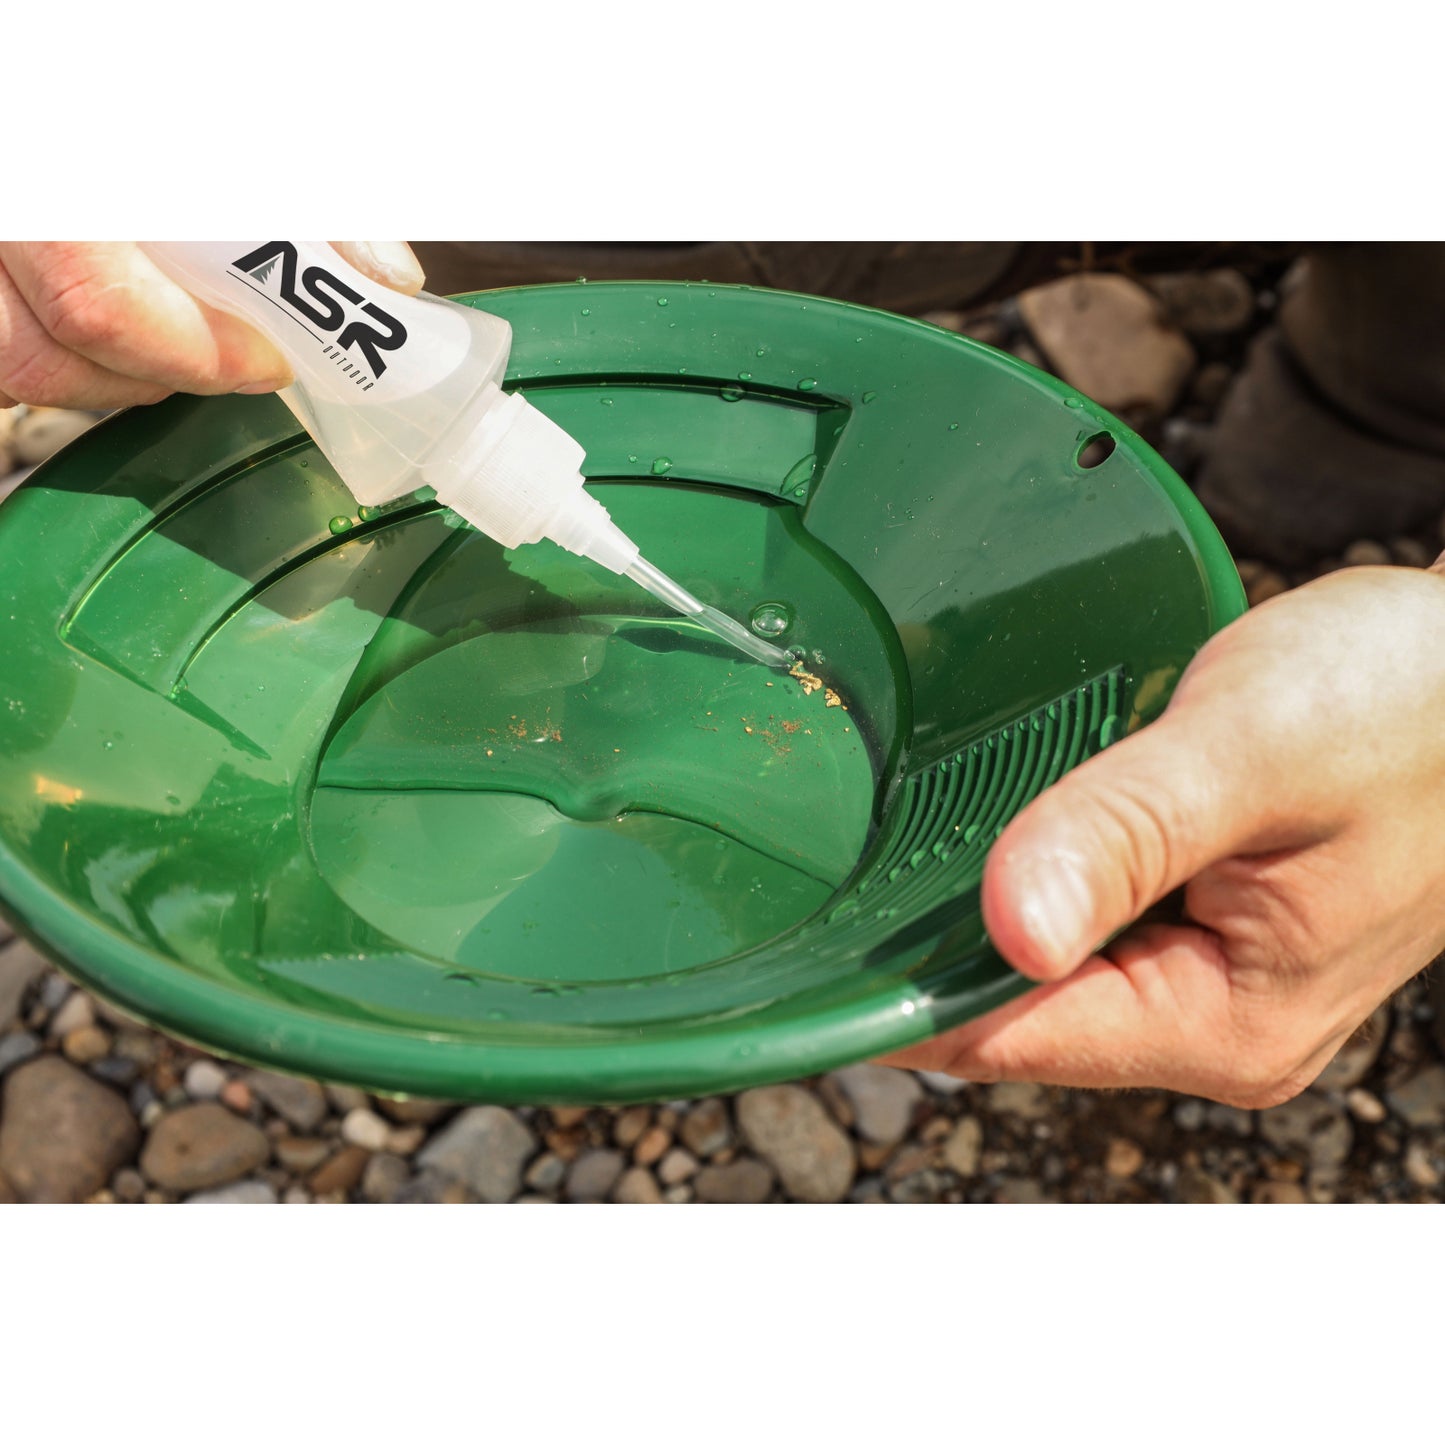 ASR Outdoor 7pc Gold Panning Kit with 1lbs Bobby Bo Beginner Classified  Paydirt Bag, Green 